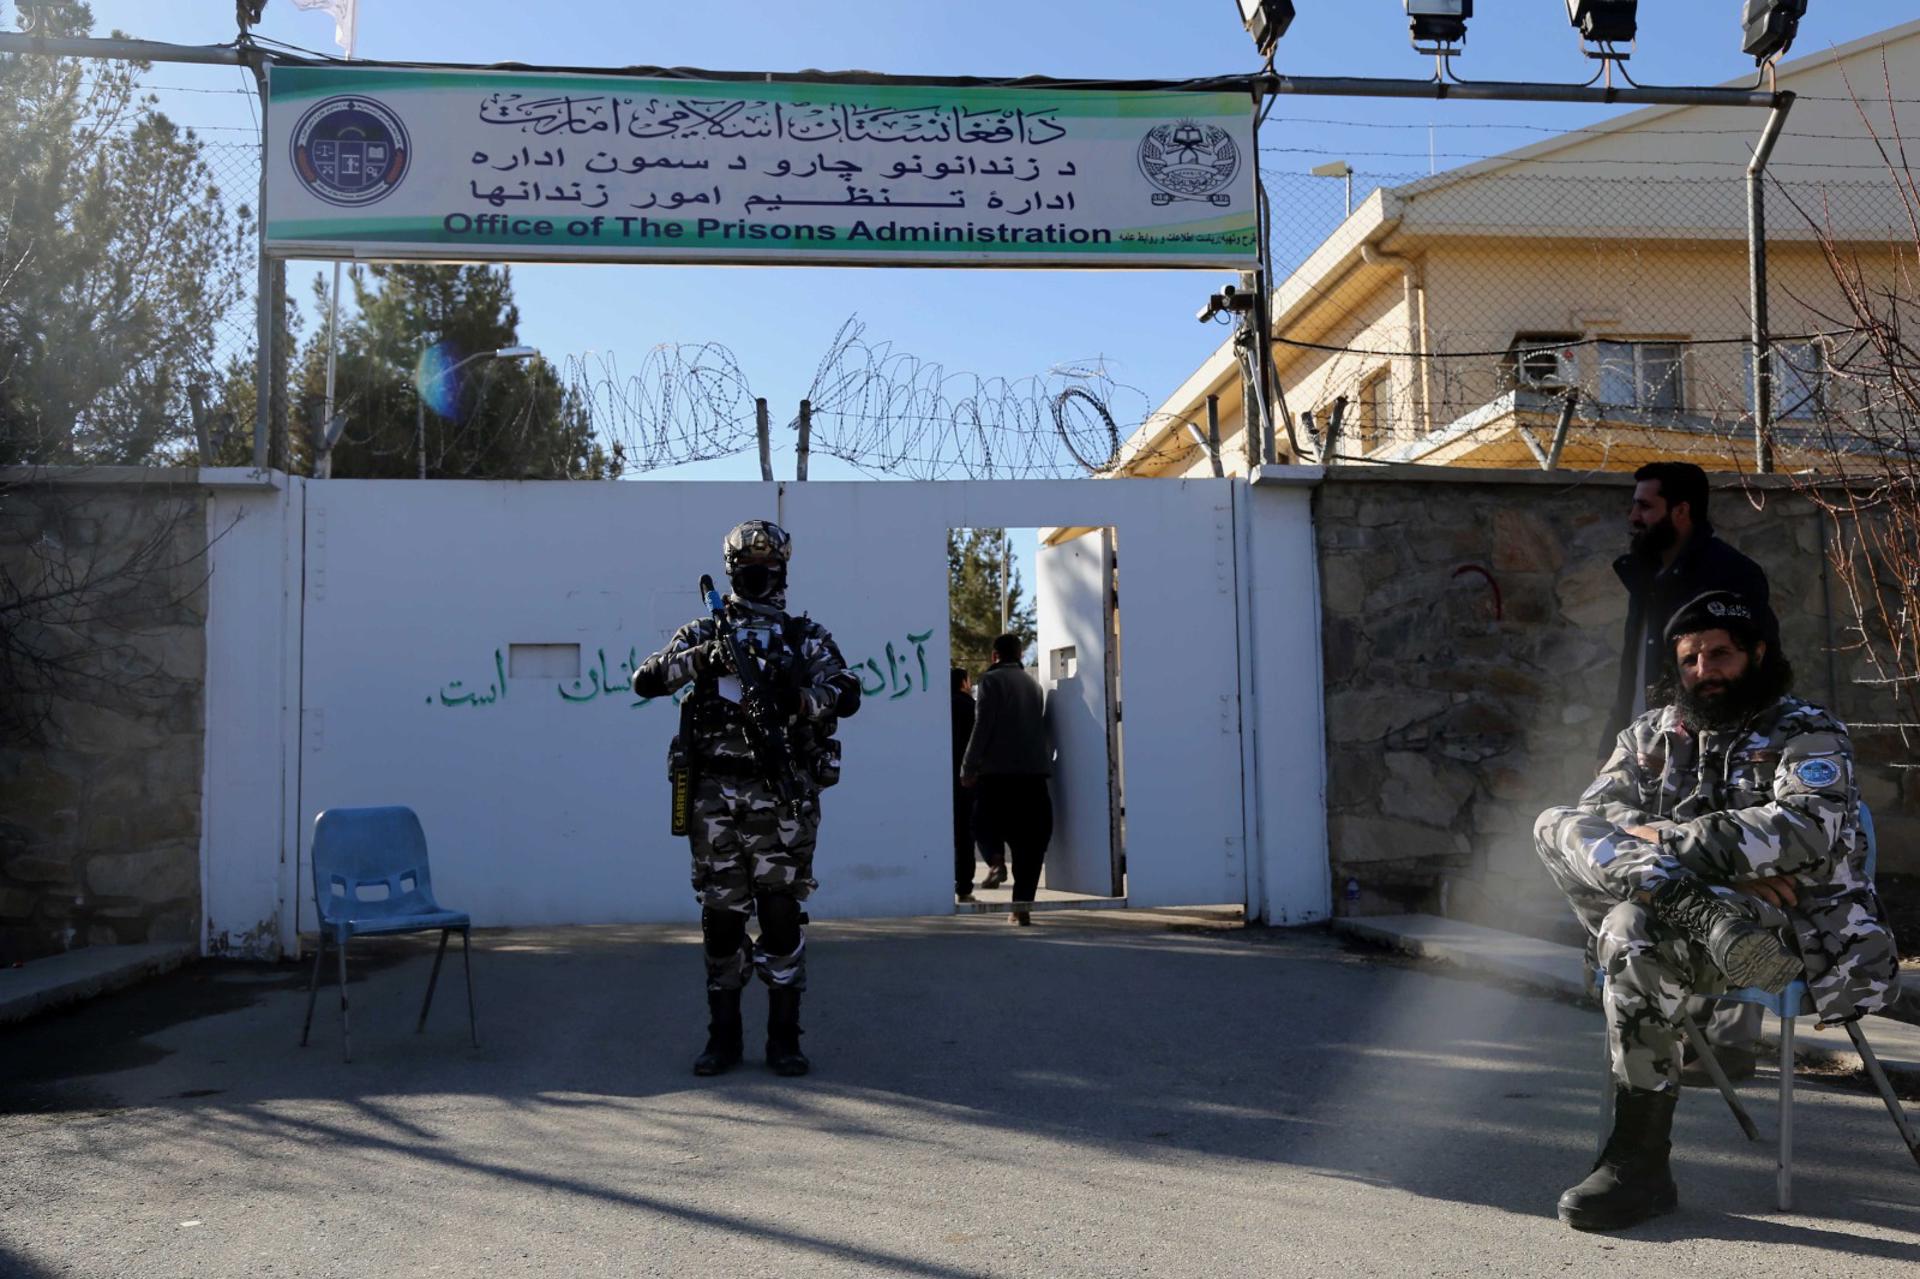 Taliban prison police guard the entrance during a ceremony Kabul, Afghanistan, 07 February 2023. EFE/EPA/FILE/Stringer